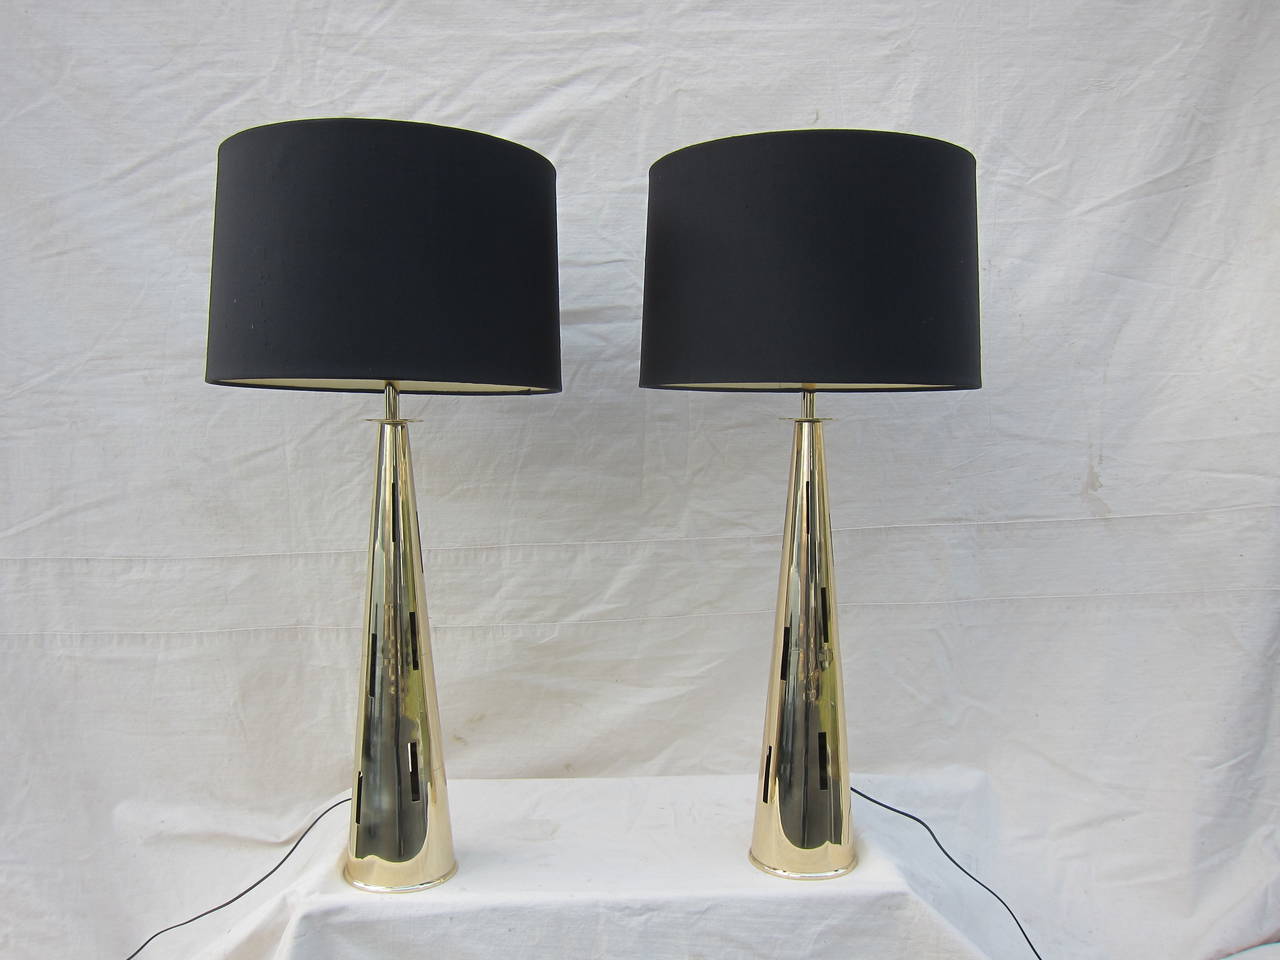 Italian Mid Century pair of  Brass Table Lamps of exceptional quality in the Style of Gio Ponti.  Concial Shaped with varring sized window cut openings.  Rewired with full dimmer controlable sockets and new Silk Shades. Excellent condition. 